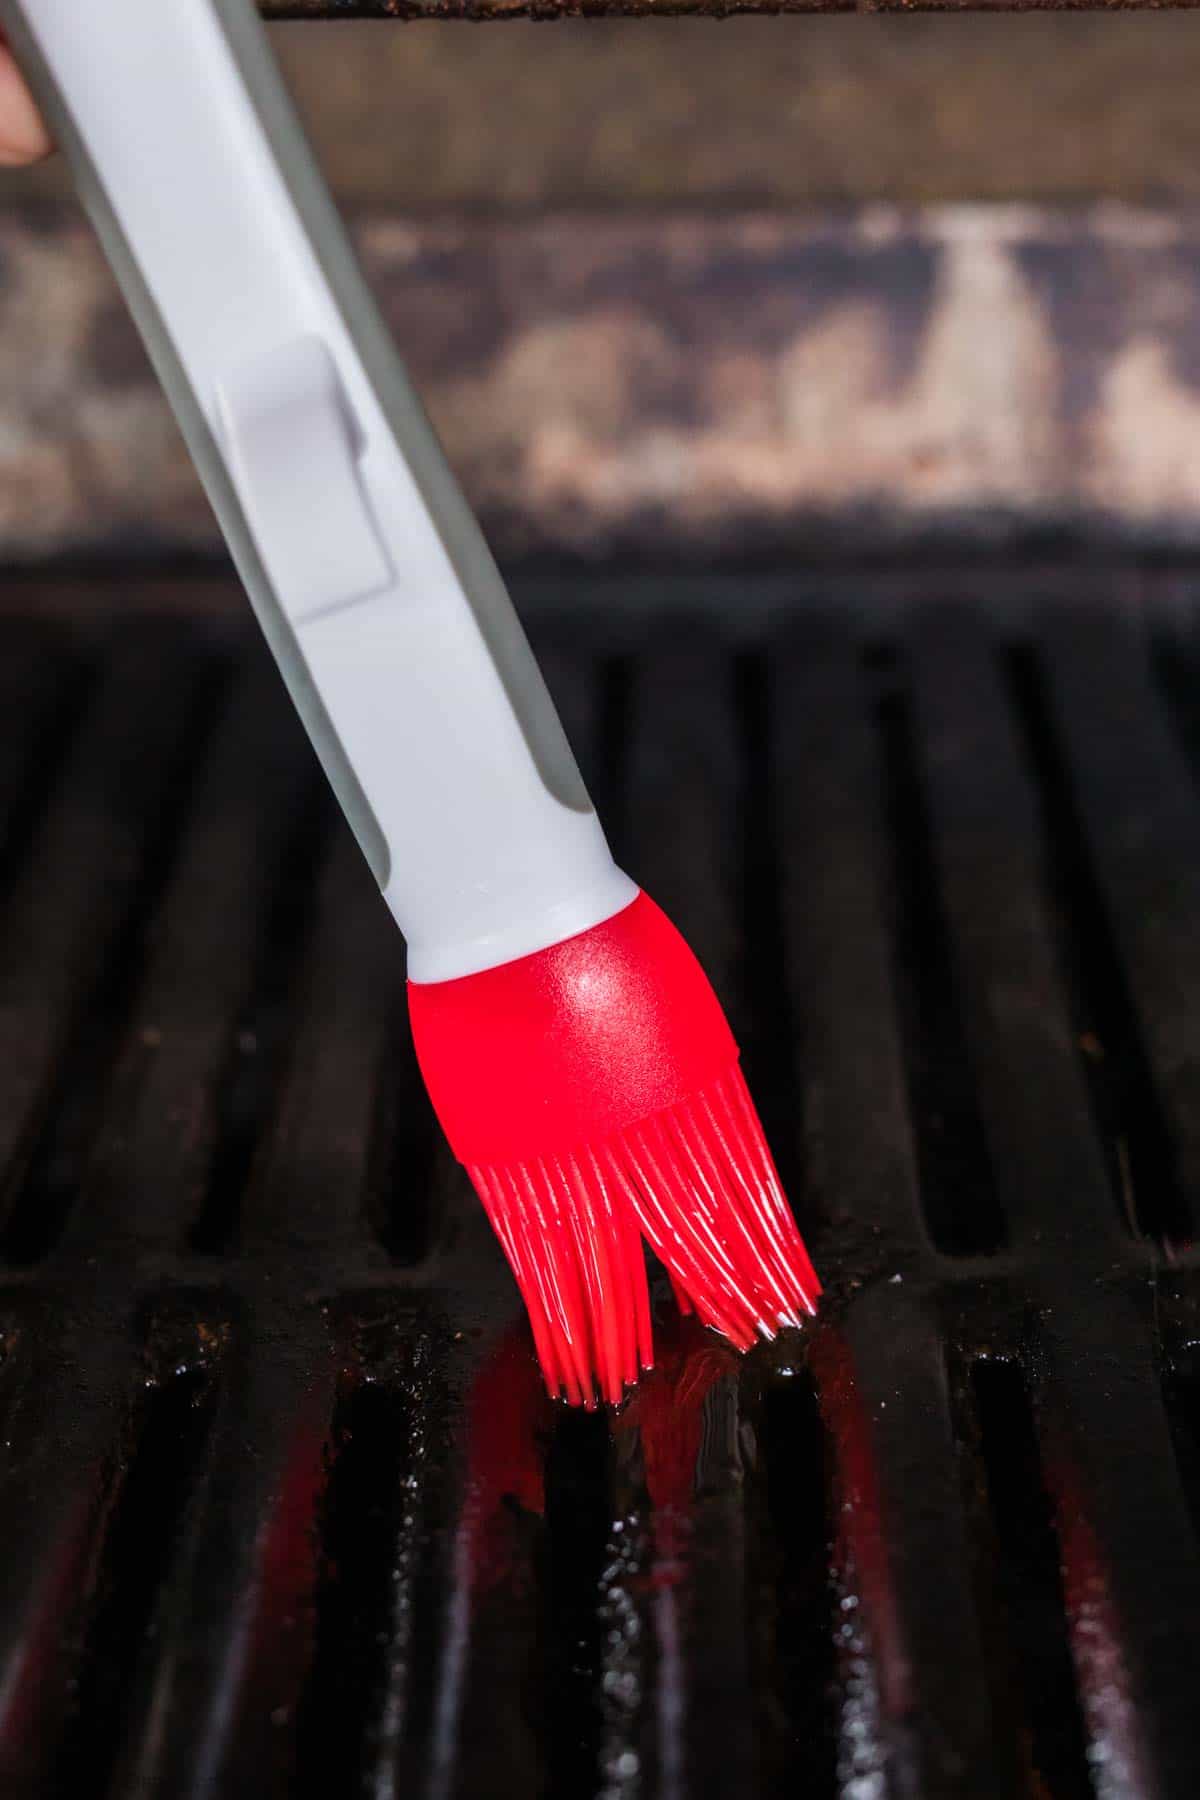 Brushing oil on the grill grates